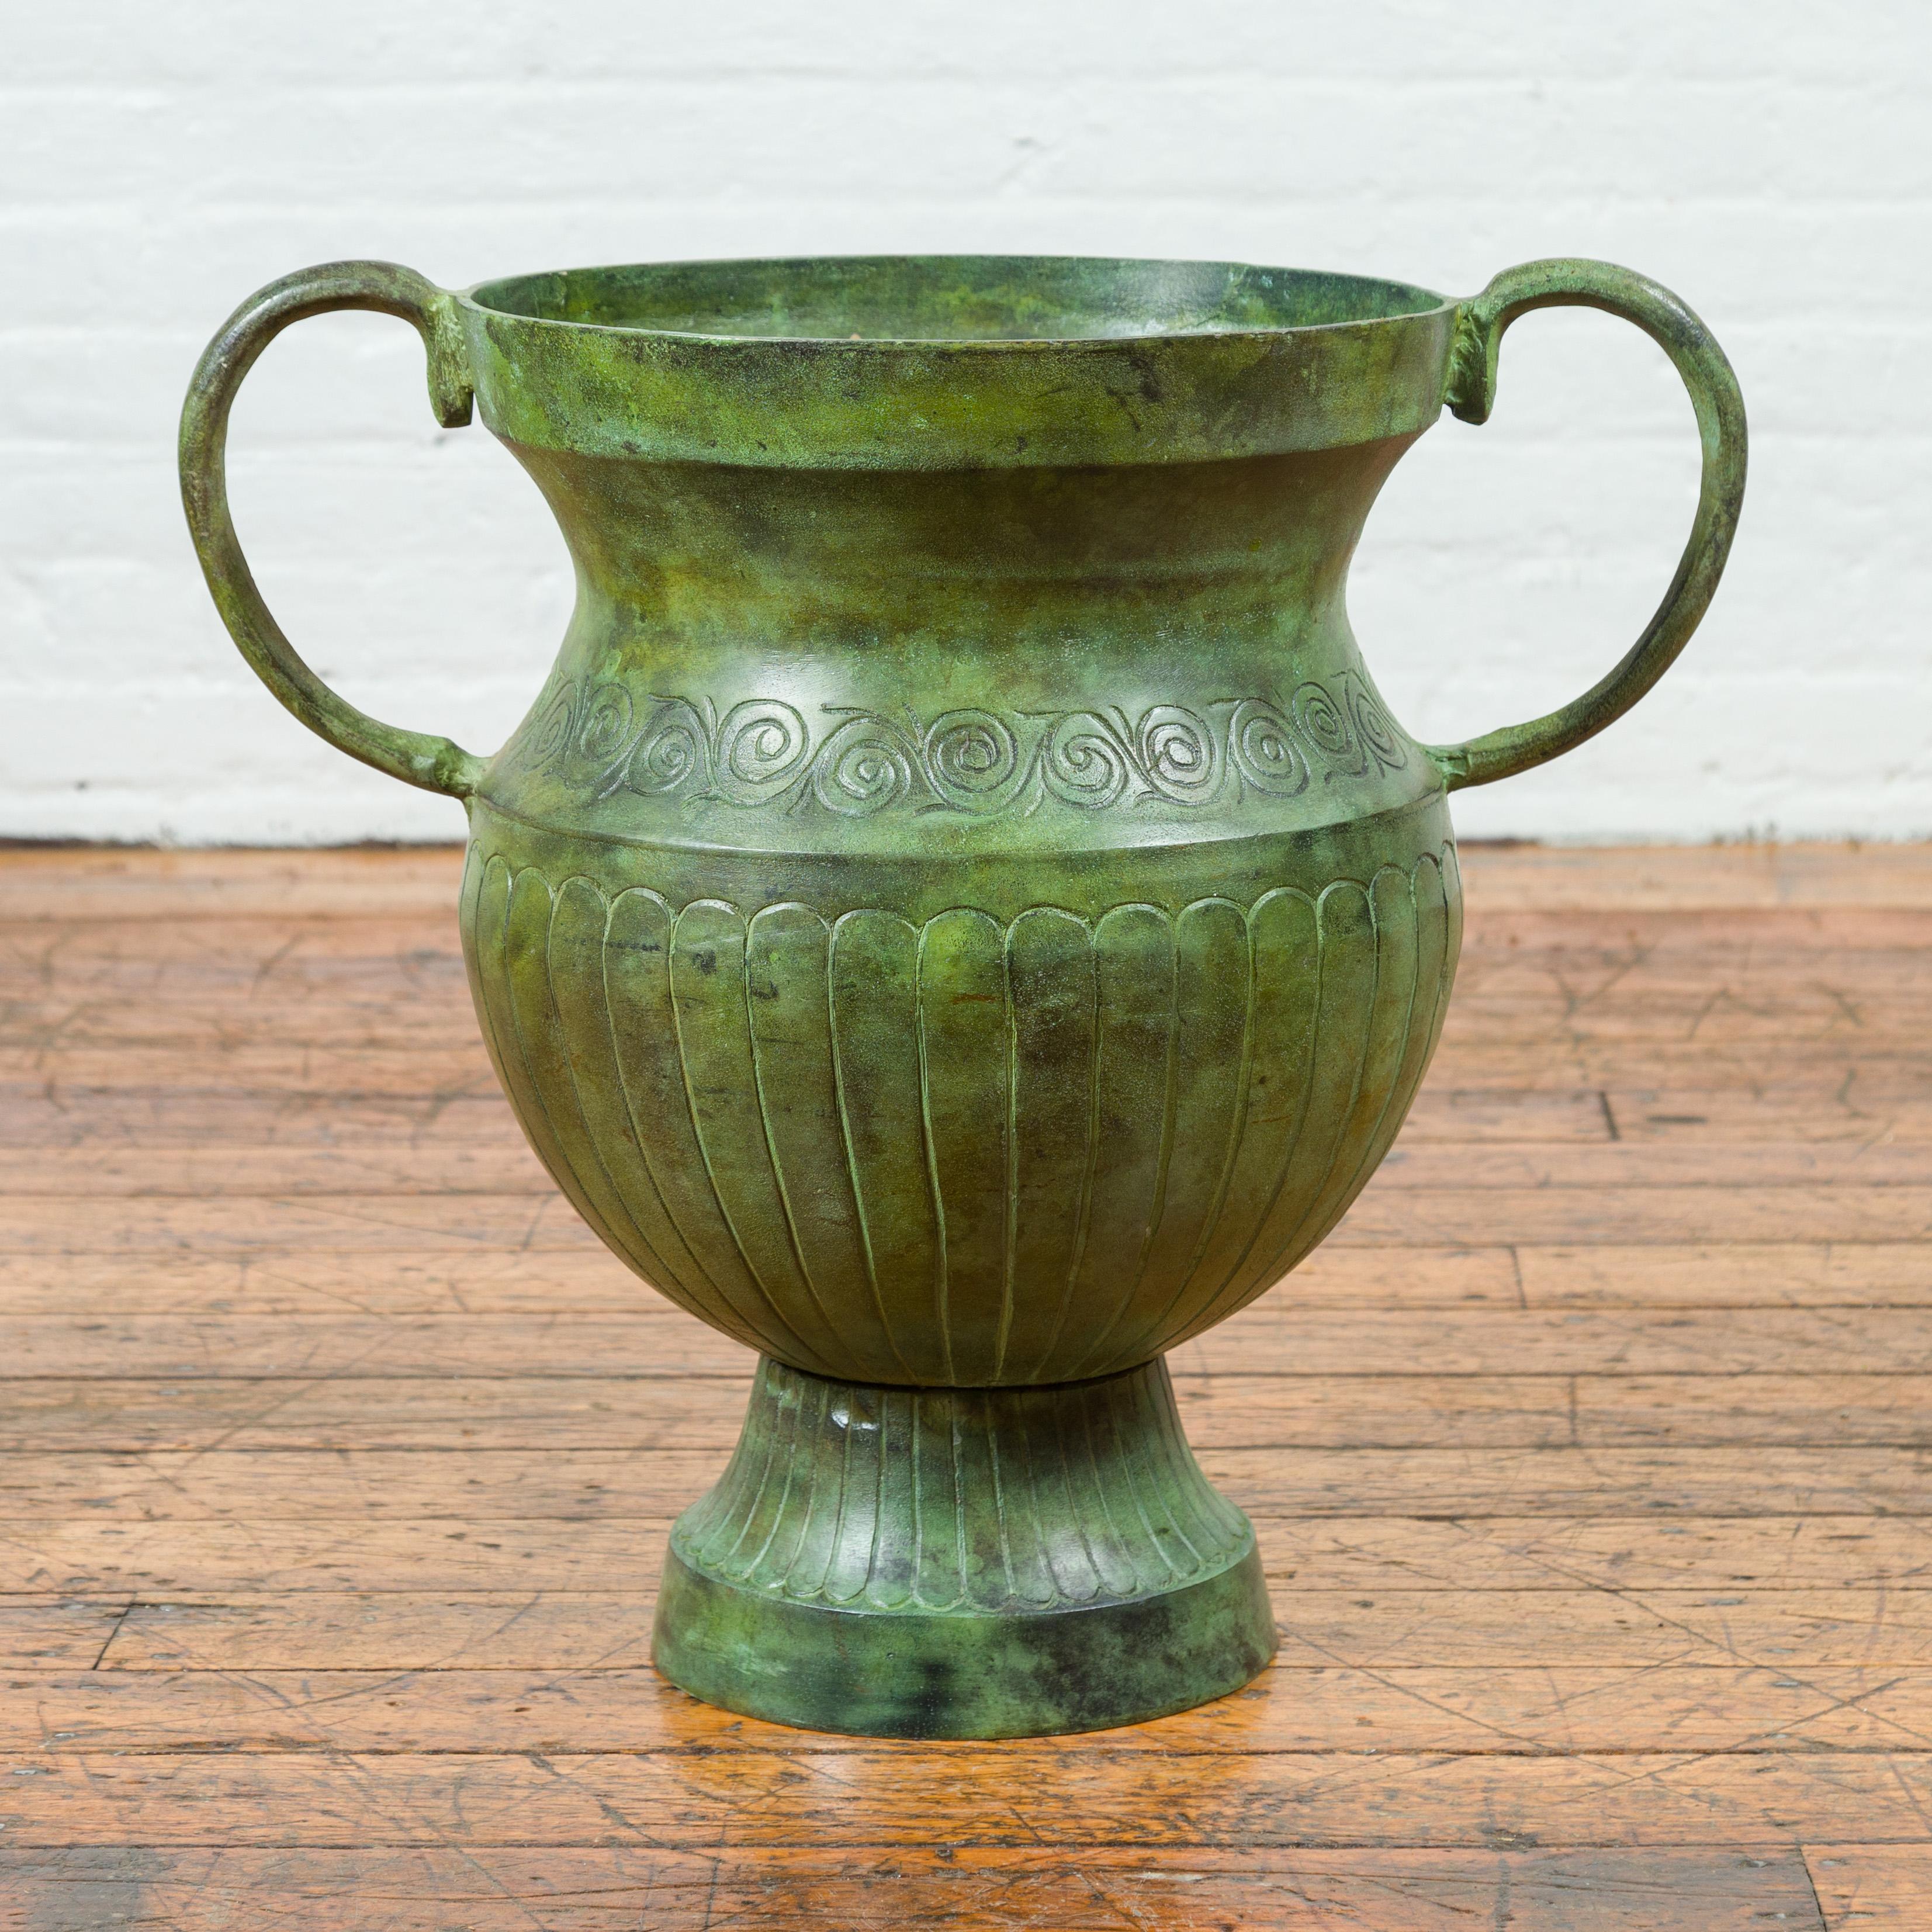 Contemporary Classical Style Urn with Verde Patina, Large Handles and Gadroons For Sale 6